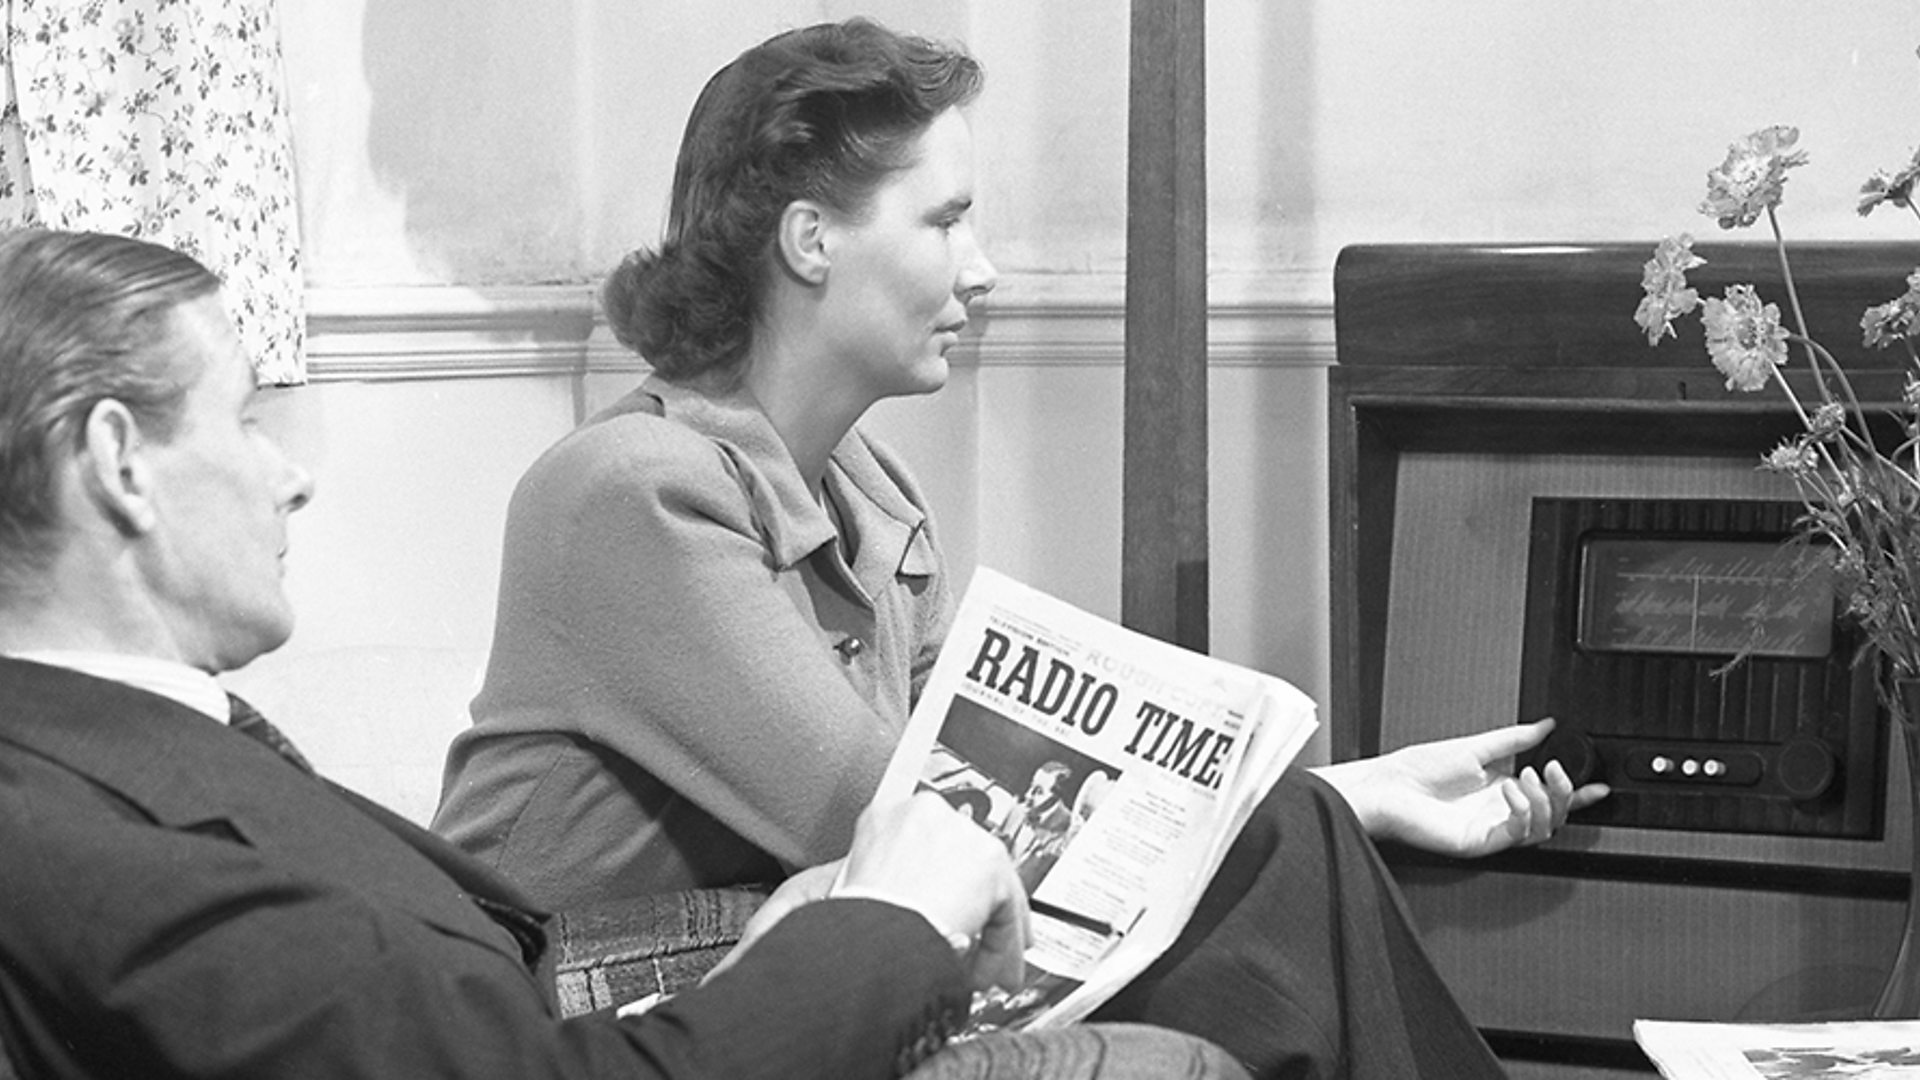 old photo of a man & woman listening to the radio. the man is holding a newspaper with the headline "Radio Time".